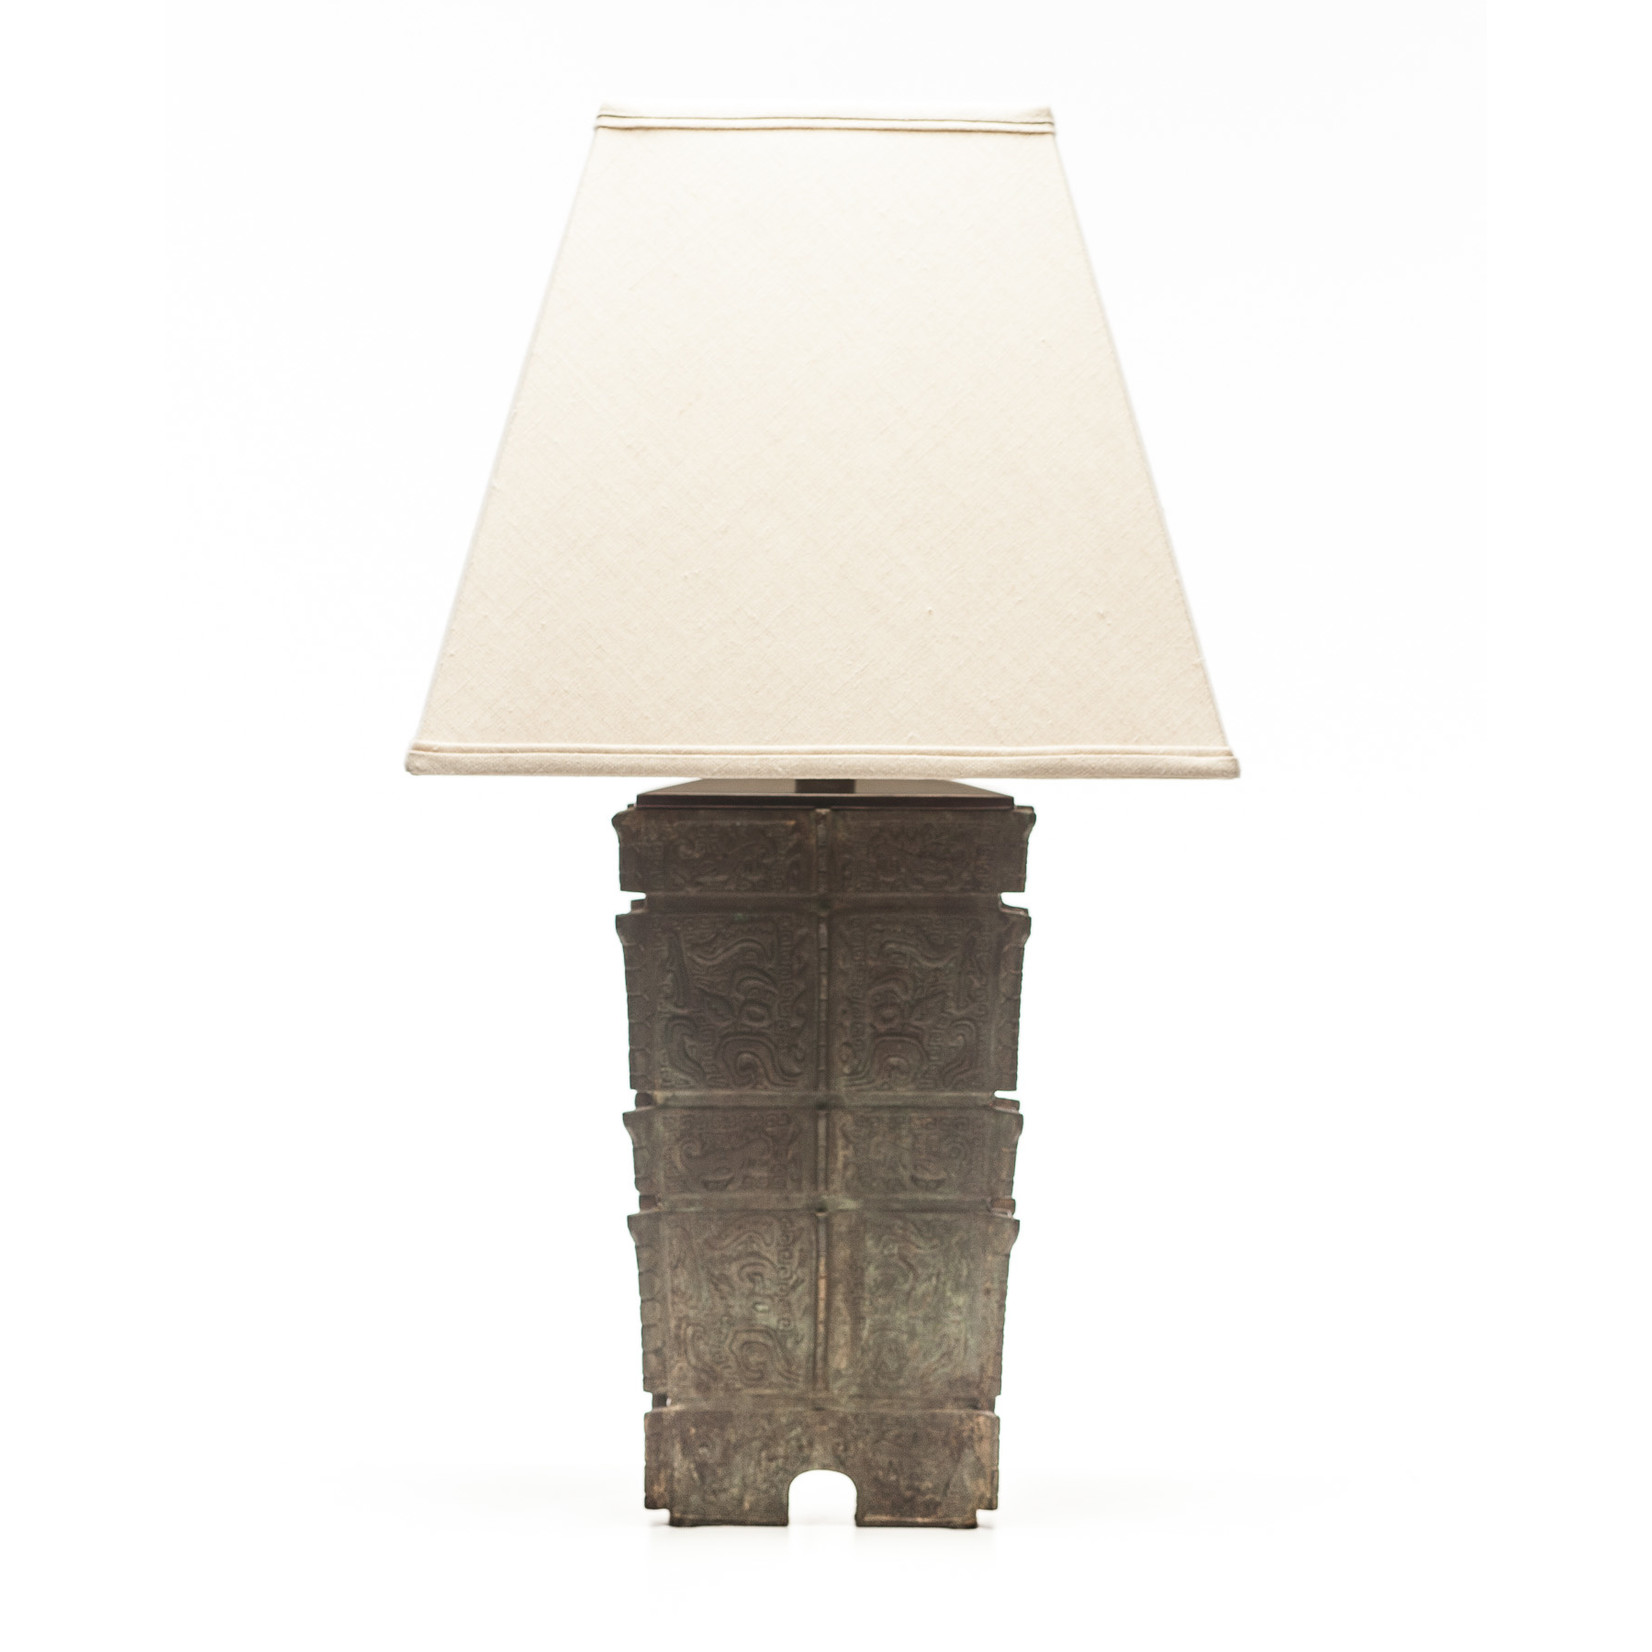 Lawrence & Scott Nelson Table Lamp in Archaic Bronze